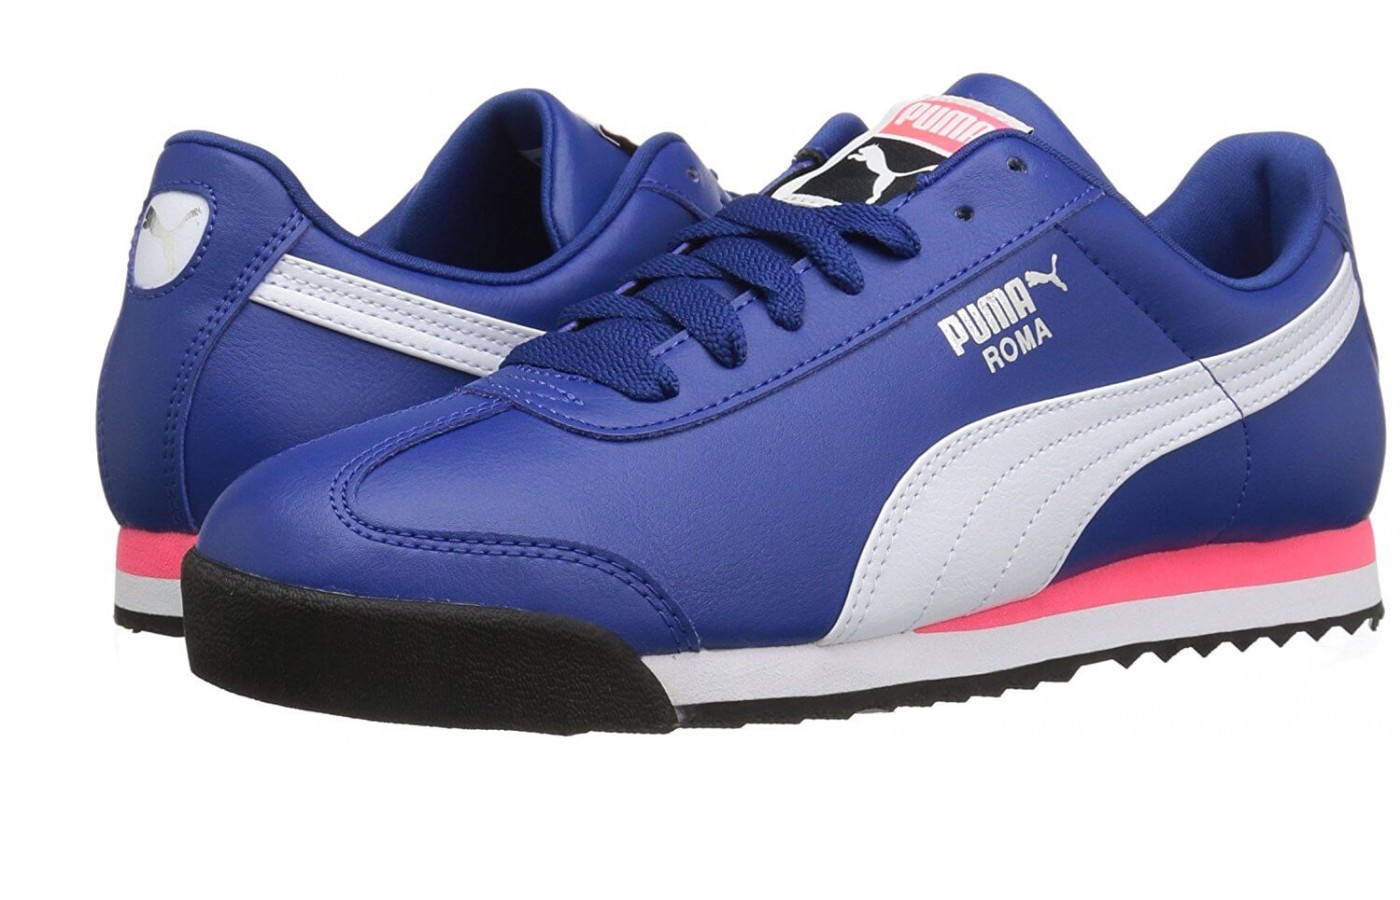 The Puma Roma features midfoot arch support